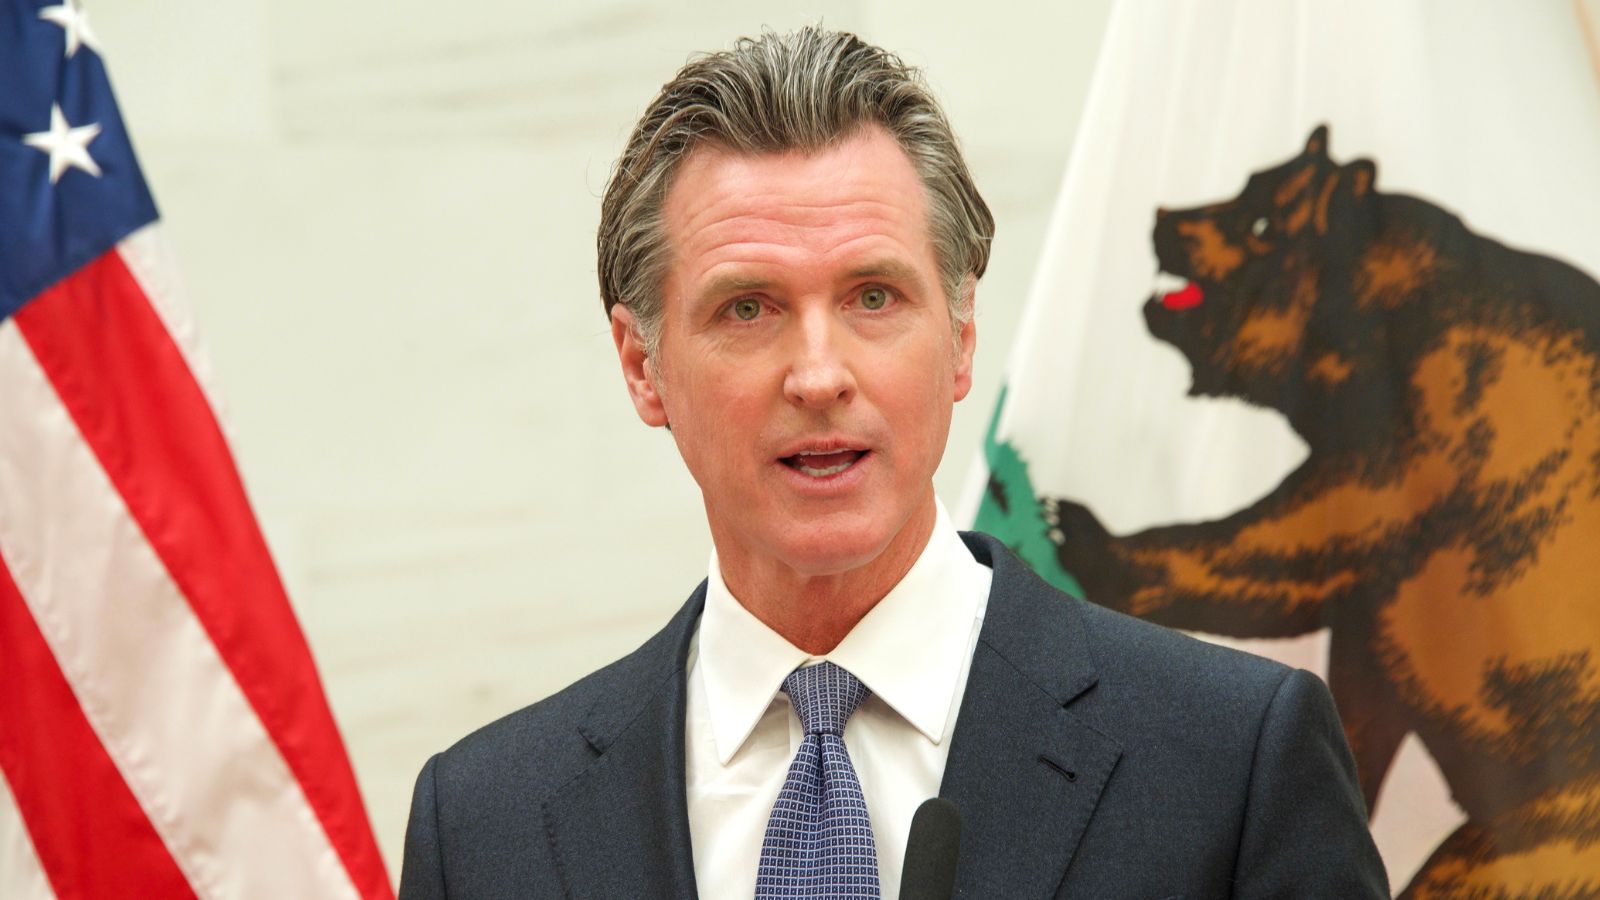 “The Last Thing He Deserves Is a Promotion”: California Gov. Newsom’s Popularity Is Plummeting